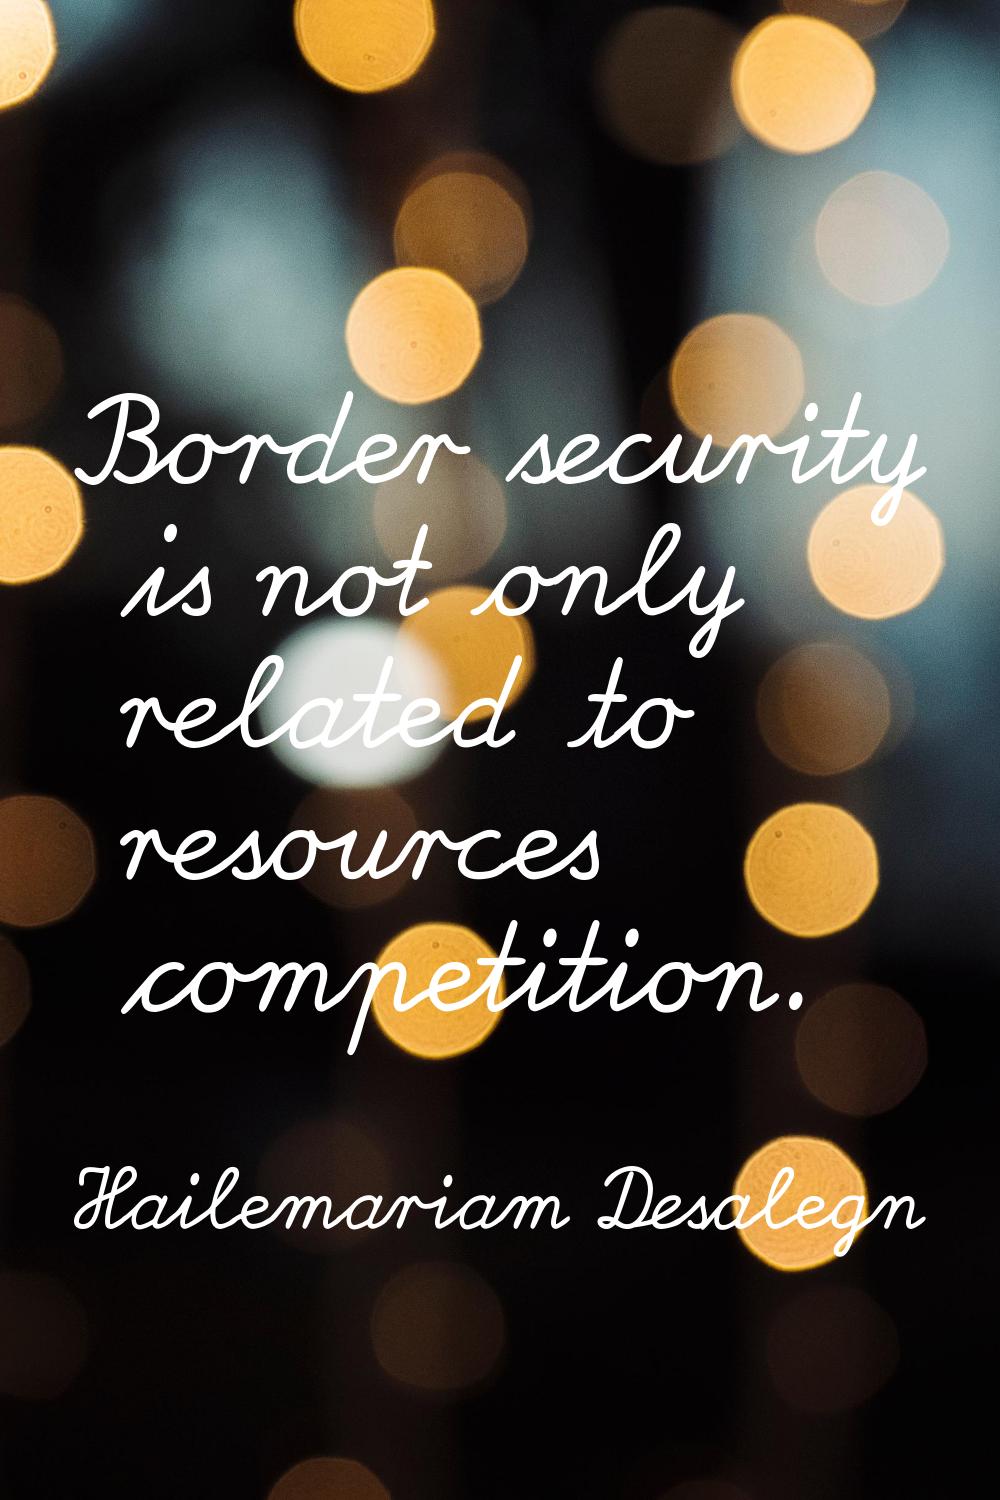 Border security is not only related to resources competition.